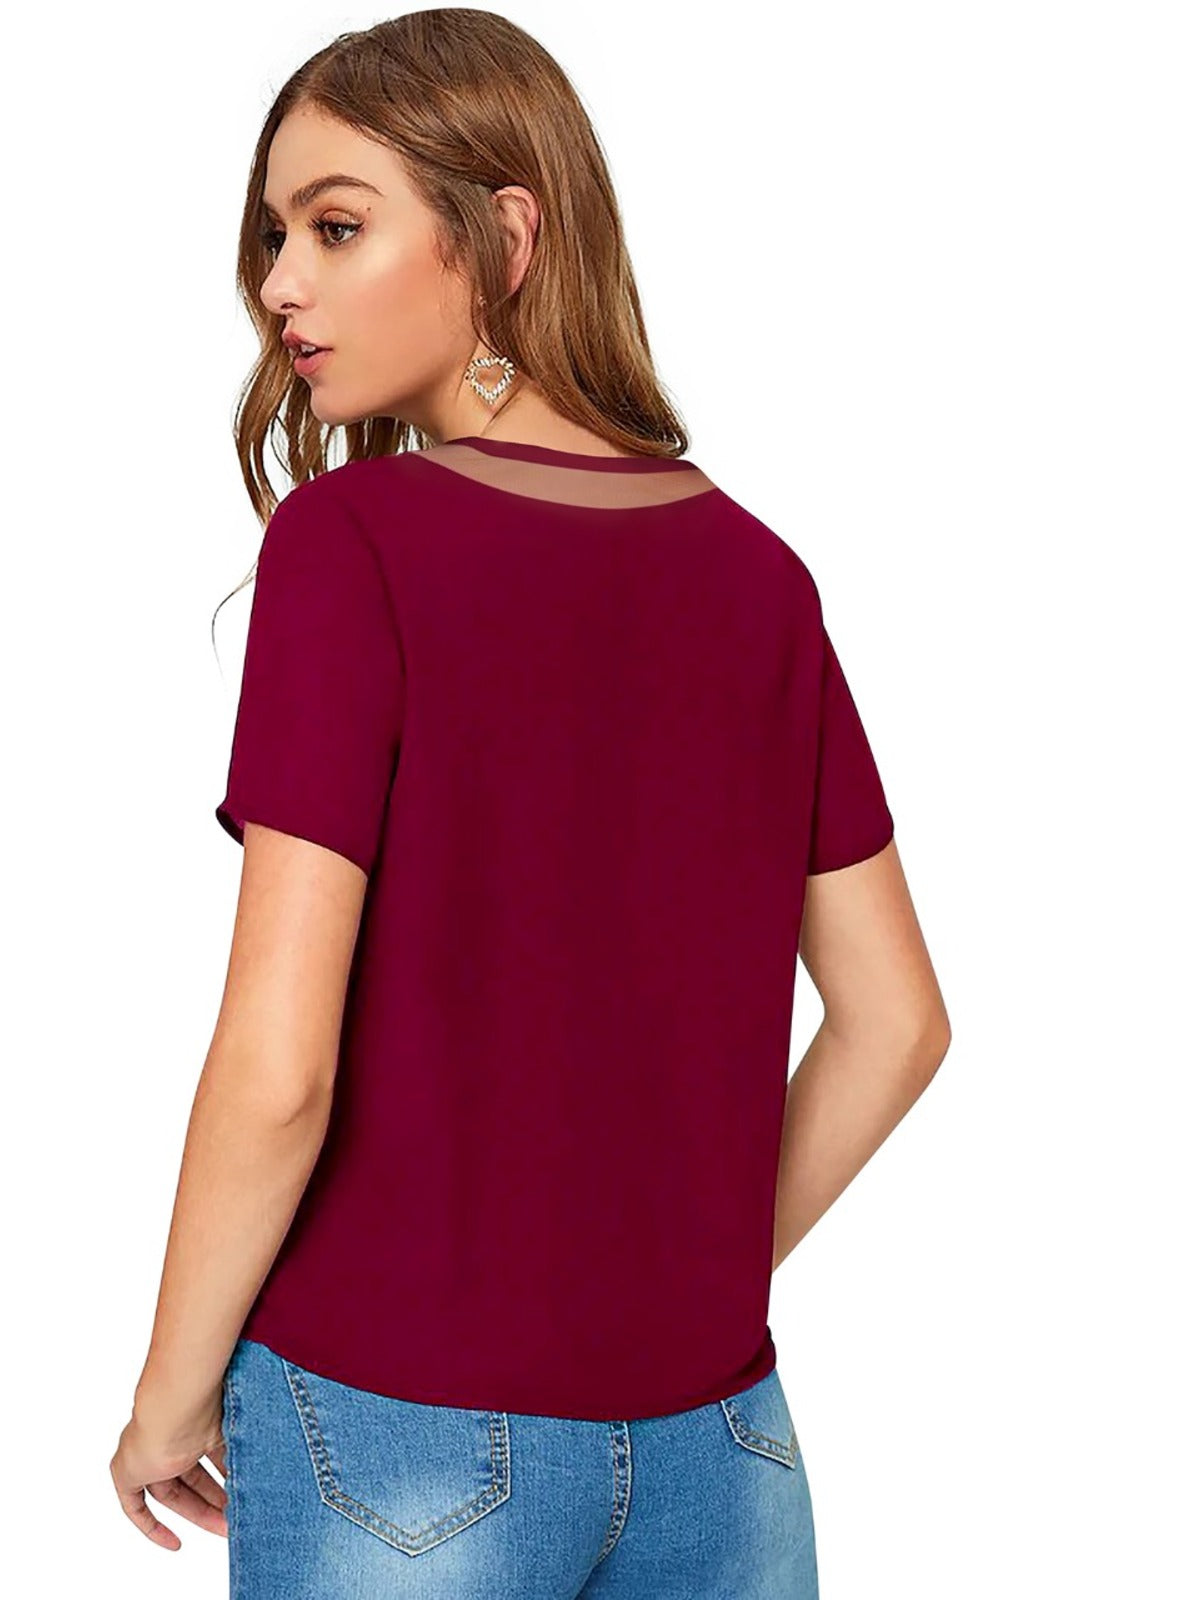 Odette Red Knit Fabric Top For Women